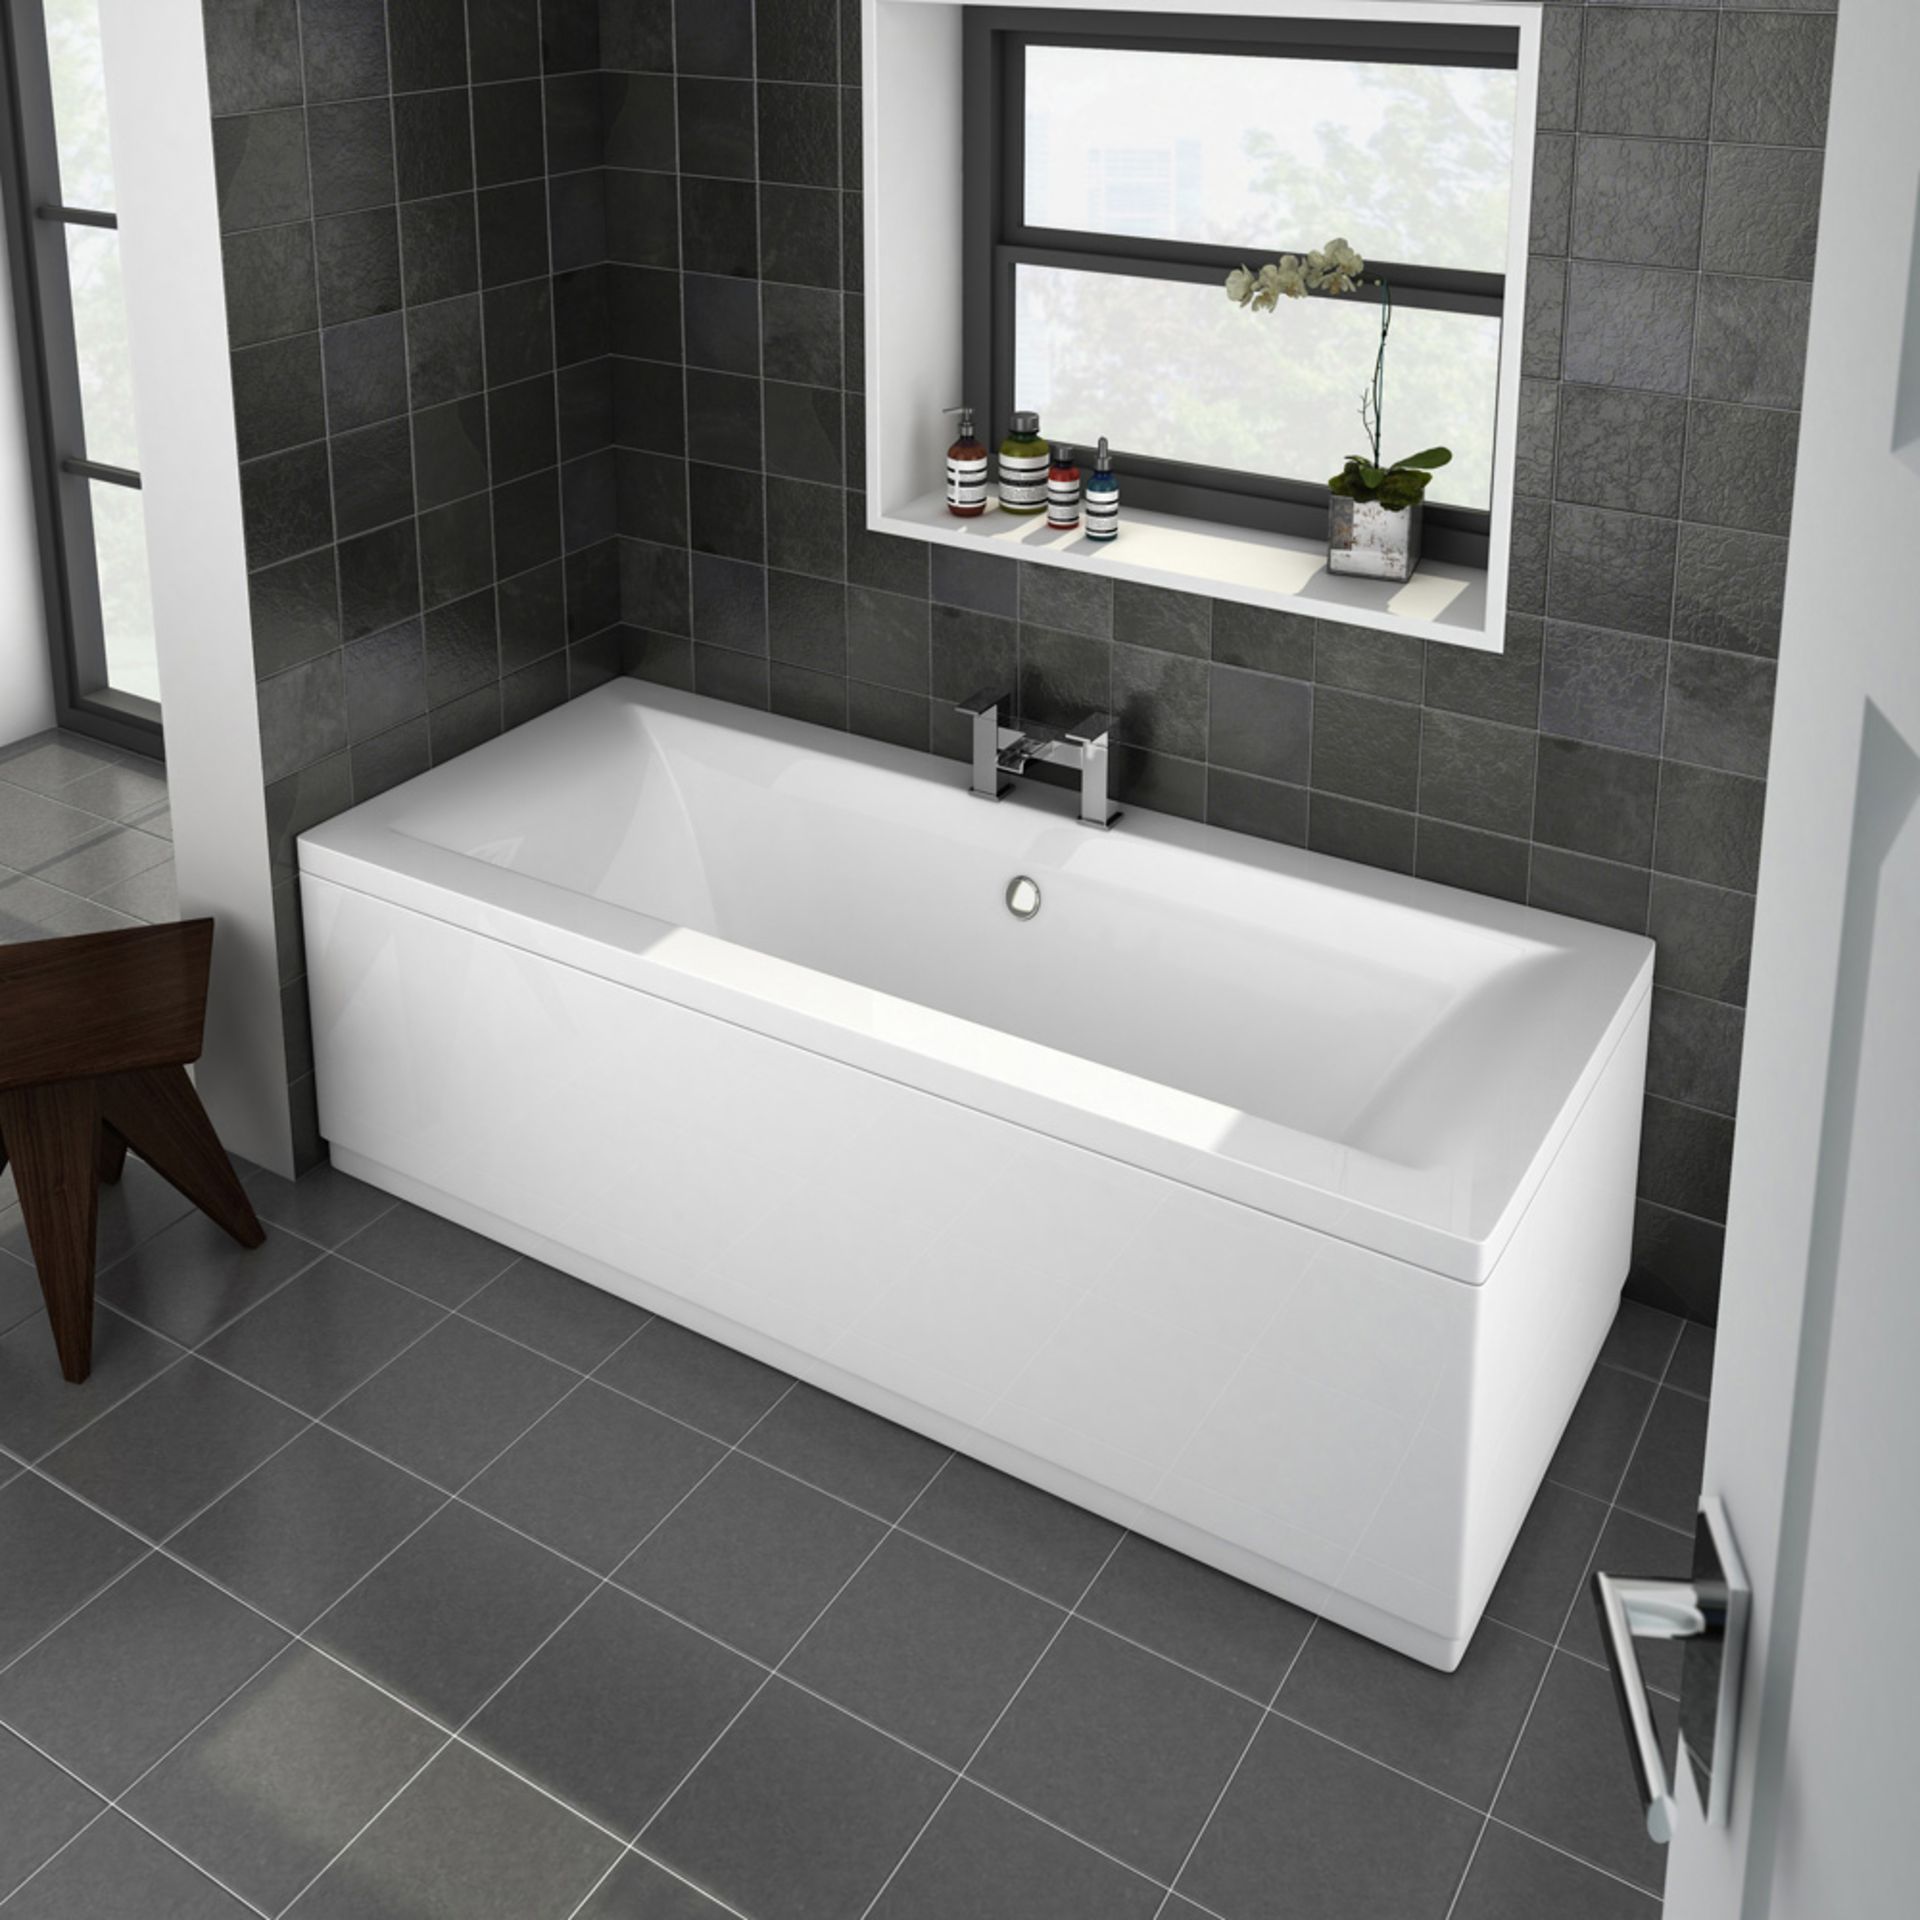 NEW 2000x900mm Keramag Deep Double Ended Bath. RRP £927.99.Our range of double ended baths inc...